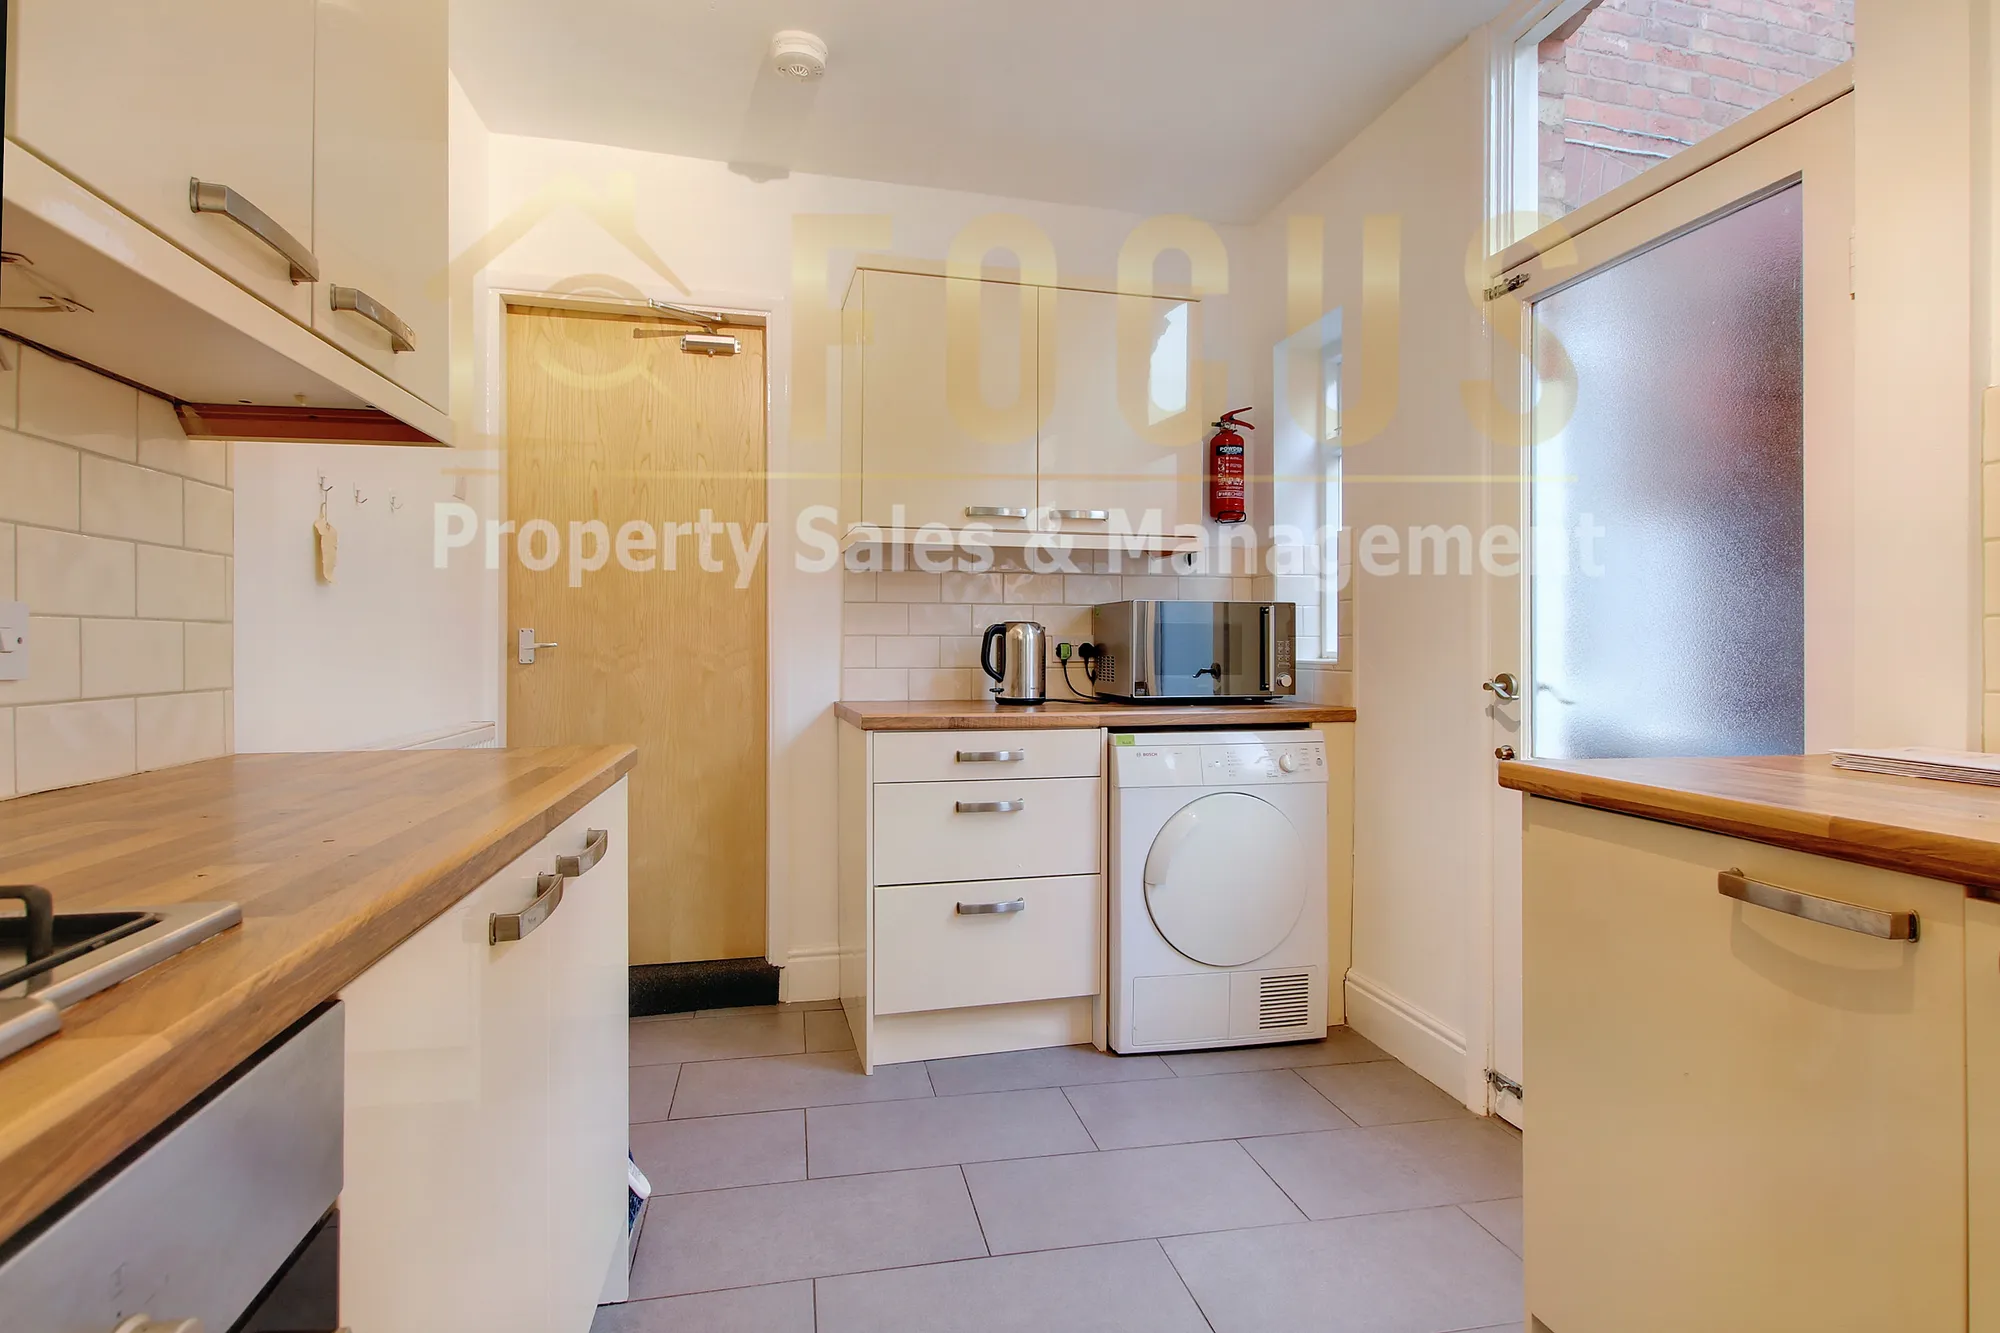 4 bed mid-terraced house to rent in Hartopp Road, Leicester  - Property Image 6